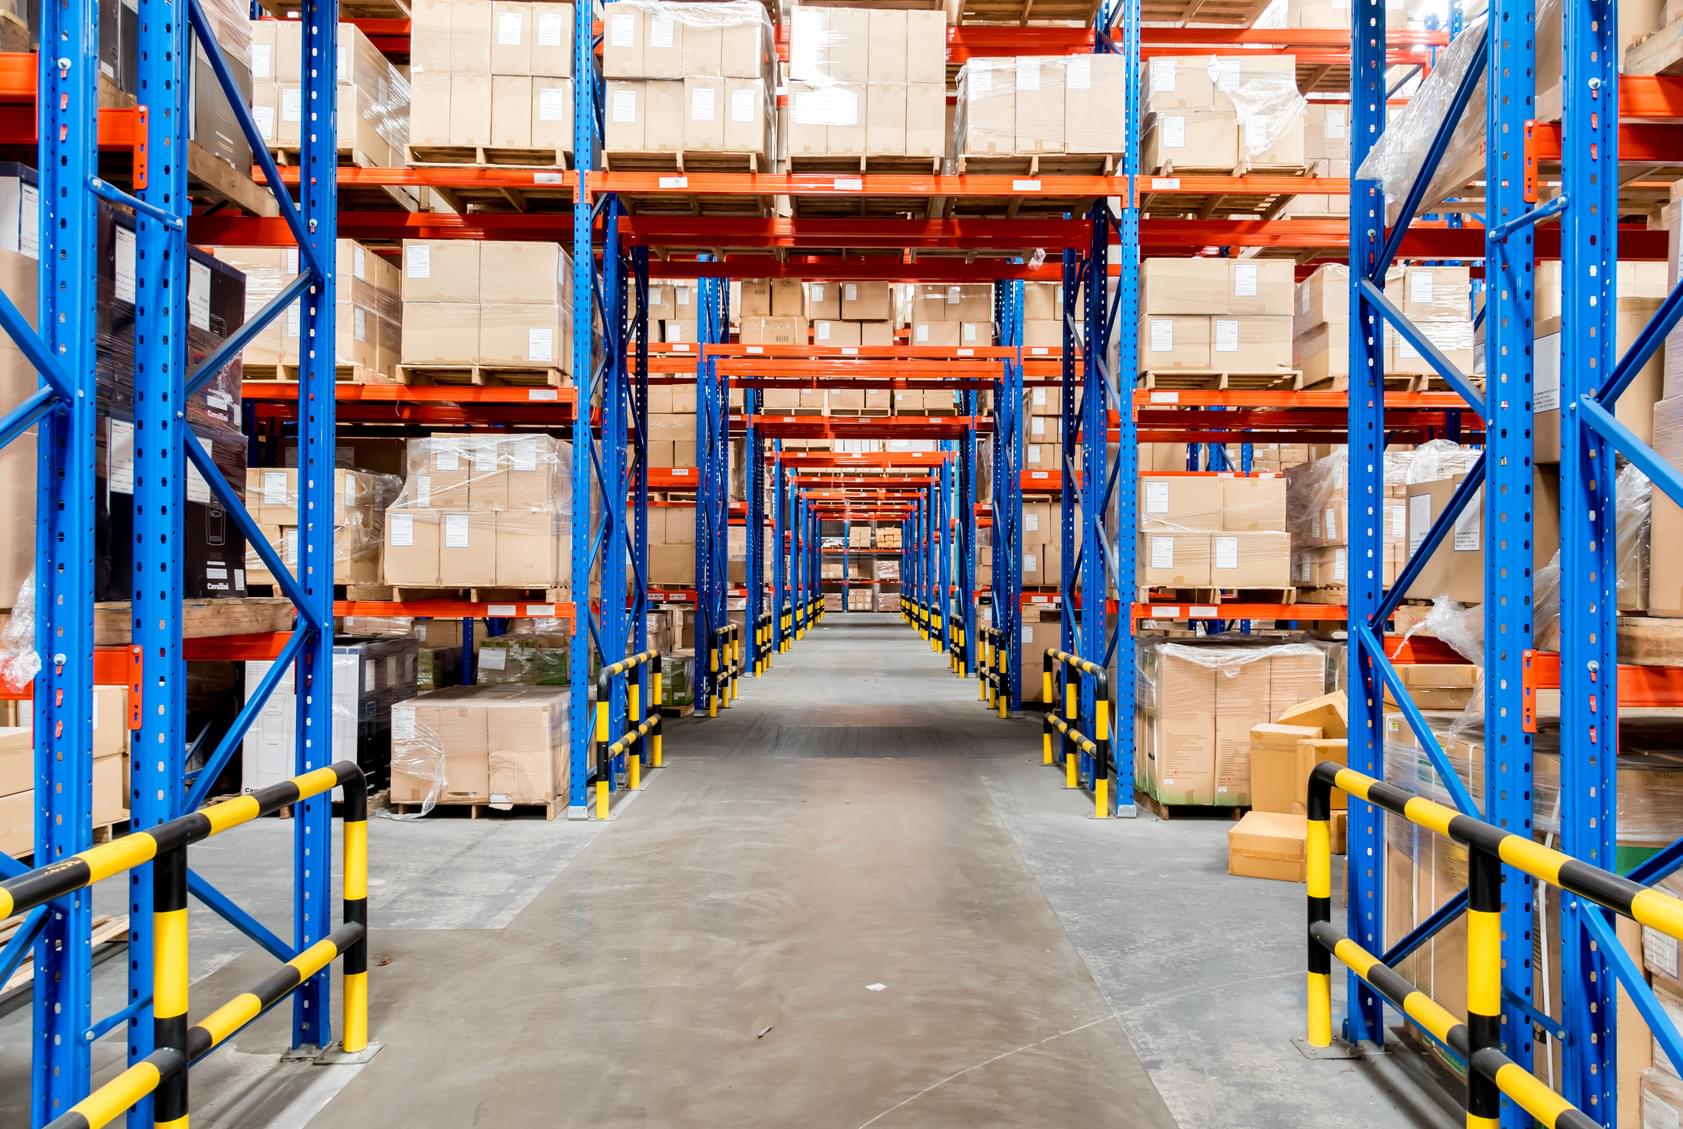 Inventory Management Tips to Get The Most Out of Your Warehouse